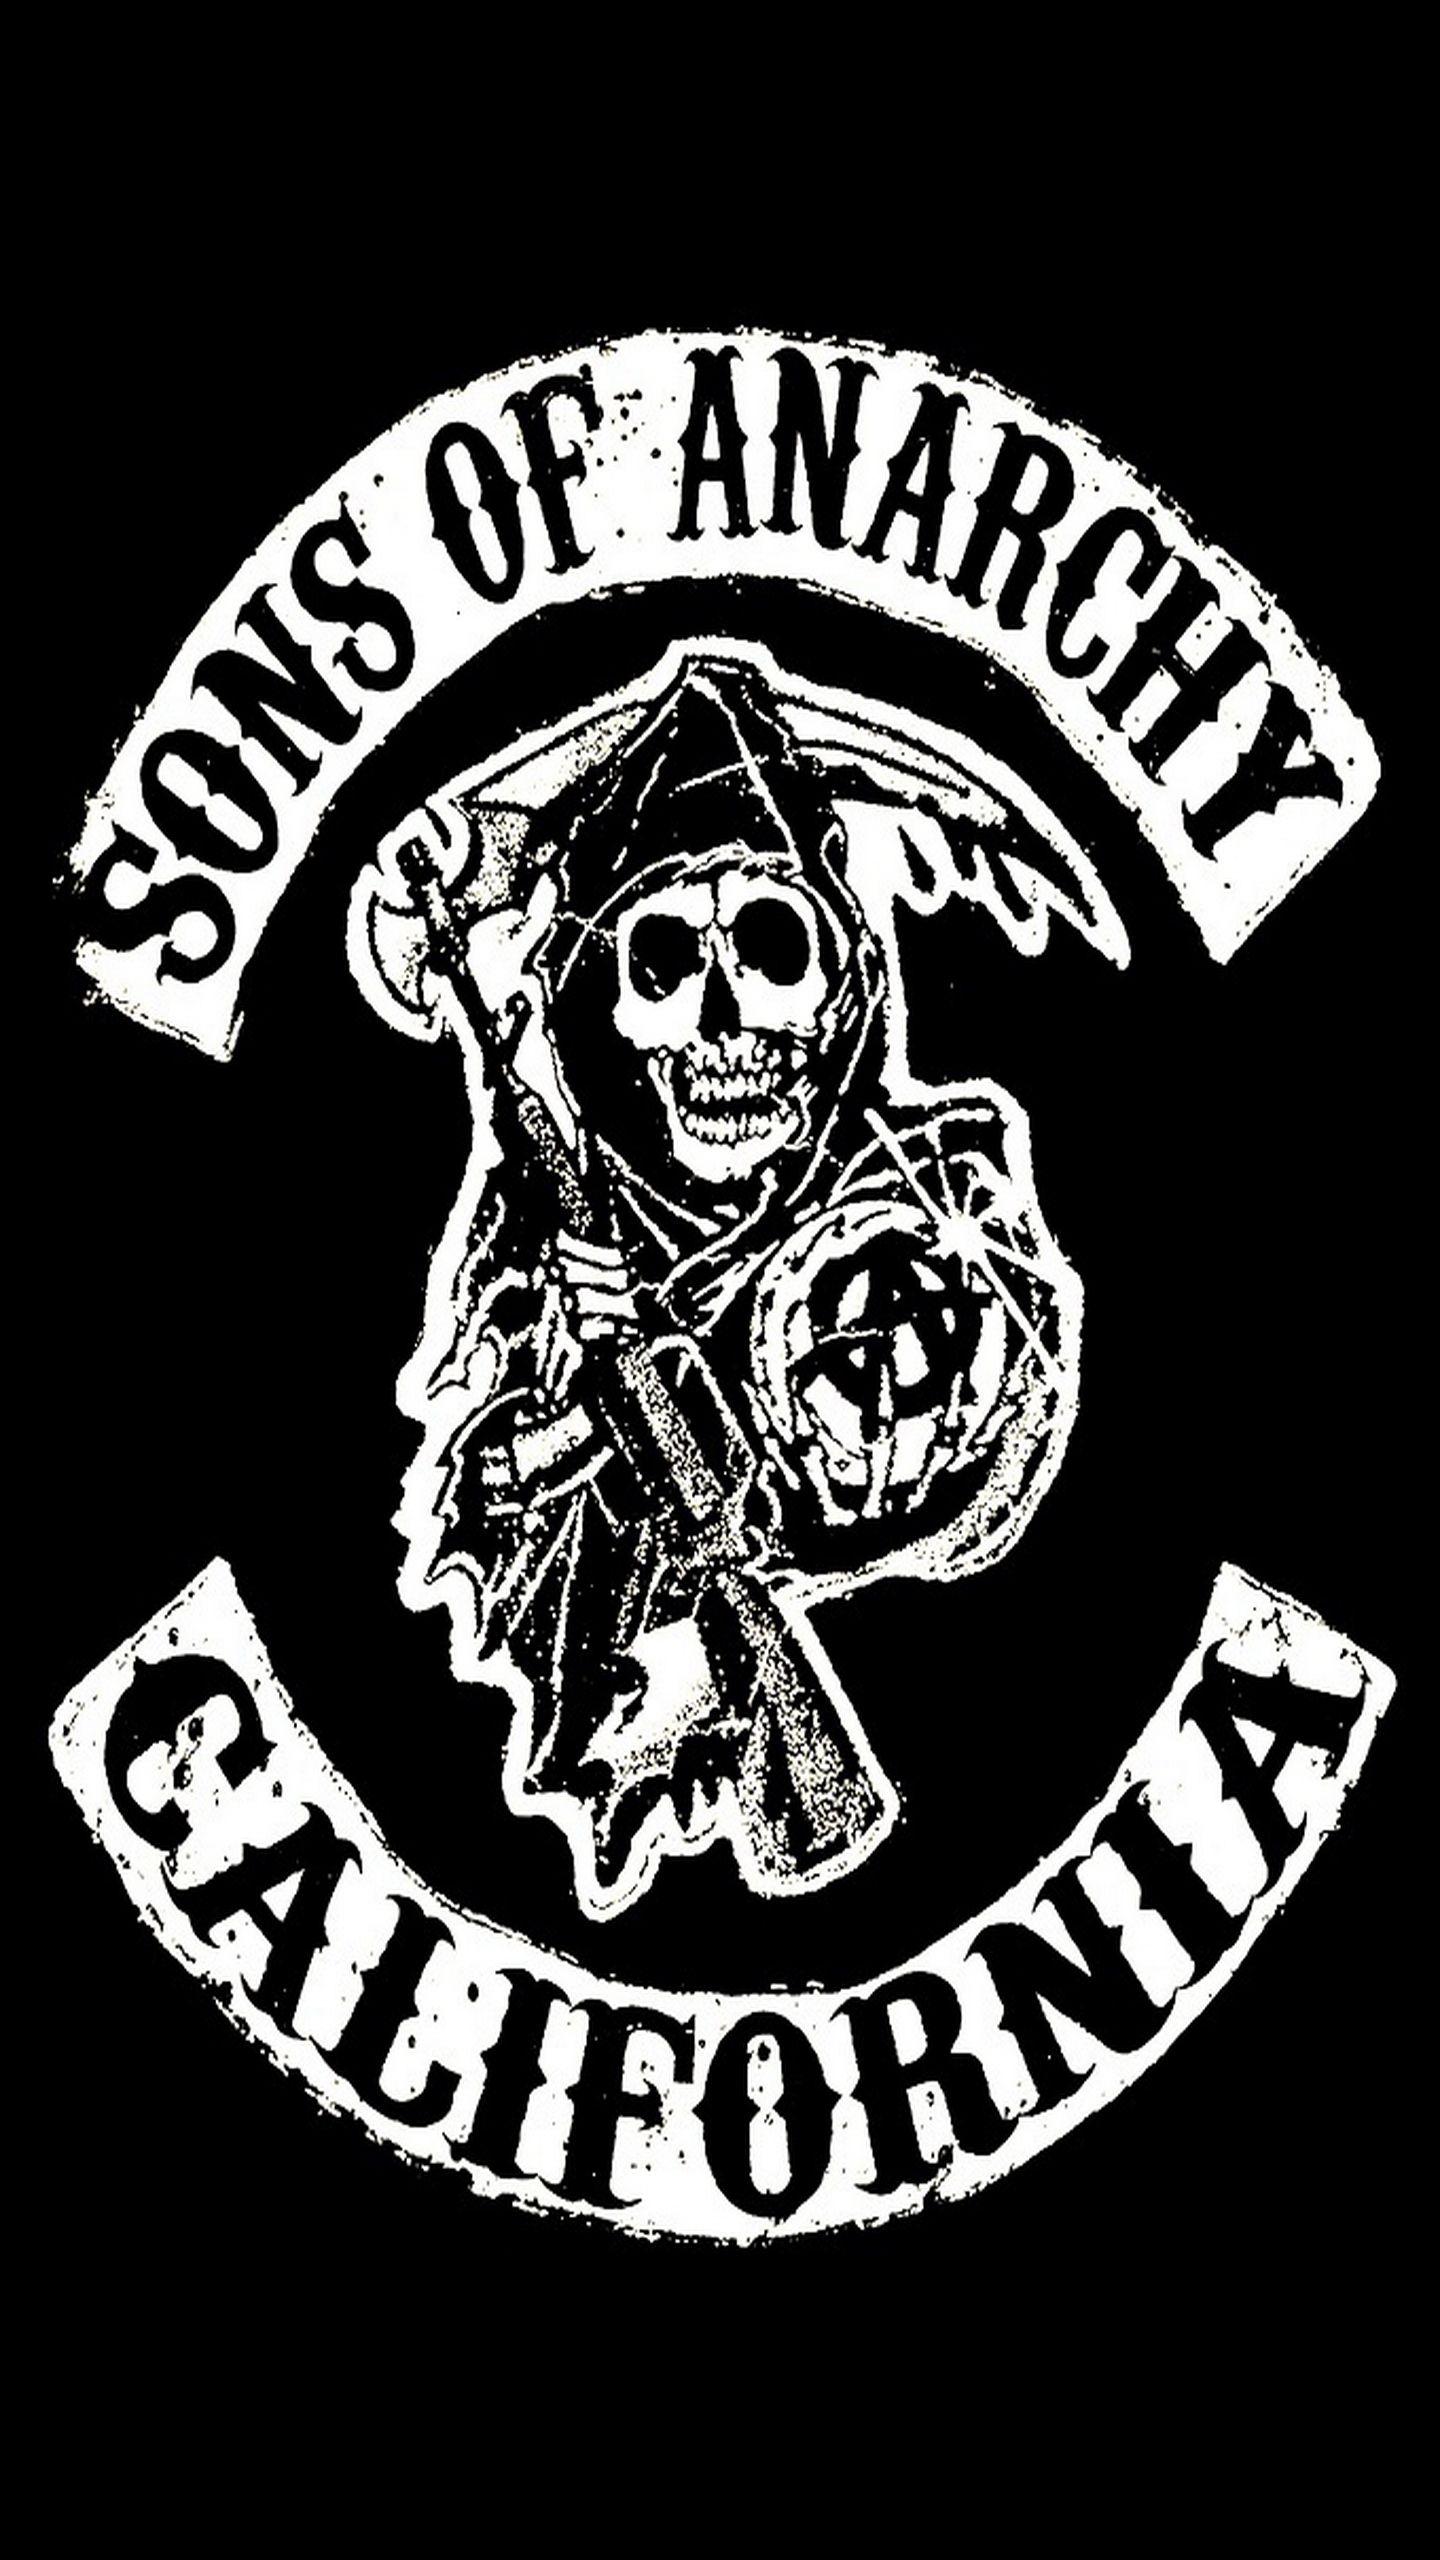 Sons of Anarchy Galaxy S6 Wallpaper (1440x2560)